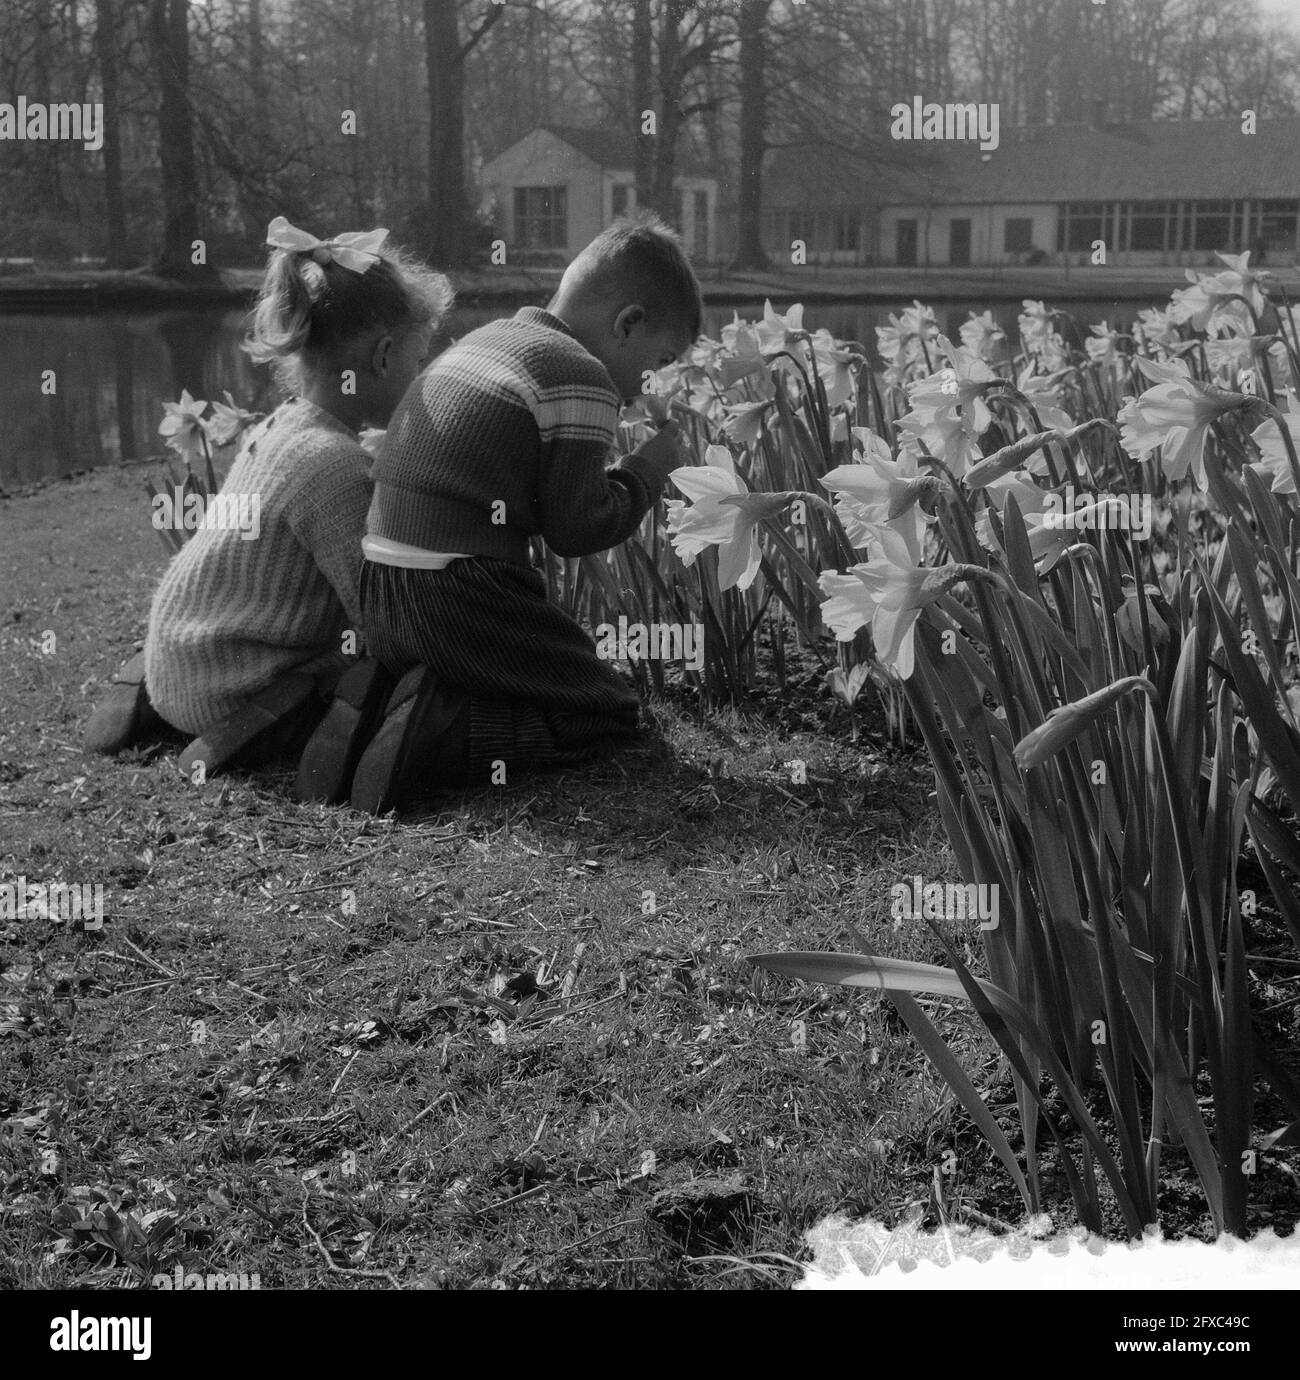 Children in daffodil fields at the Keukenhof in Lisse, March 12, 1957, flowers, children, parks, The Netherlands, 20th century press agency photo, news to remember, documentary, historic photography 1945-1990, visual stories, human history of the Twentieth Century, capturing moments in time Stock Photo